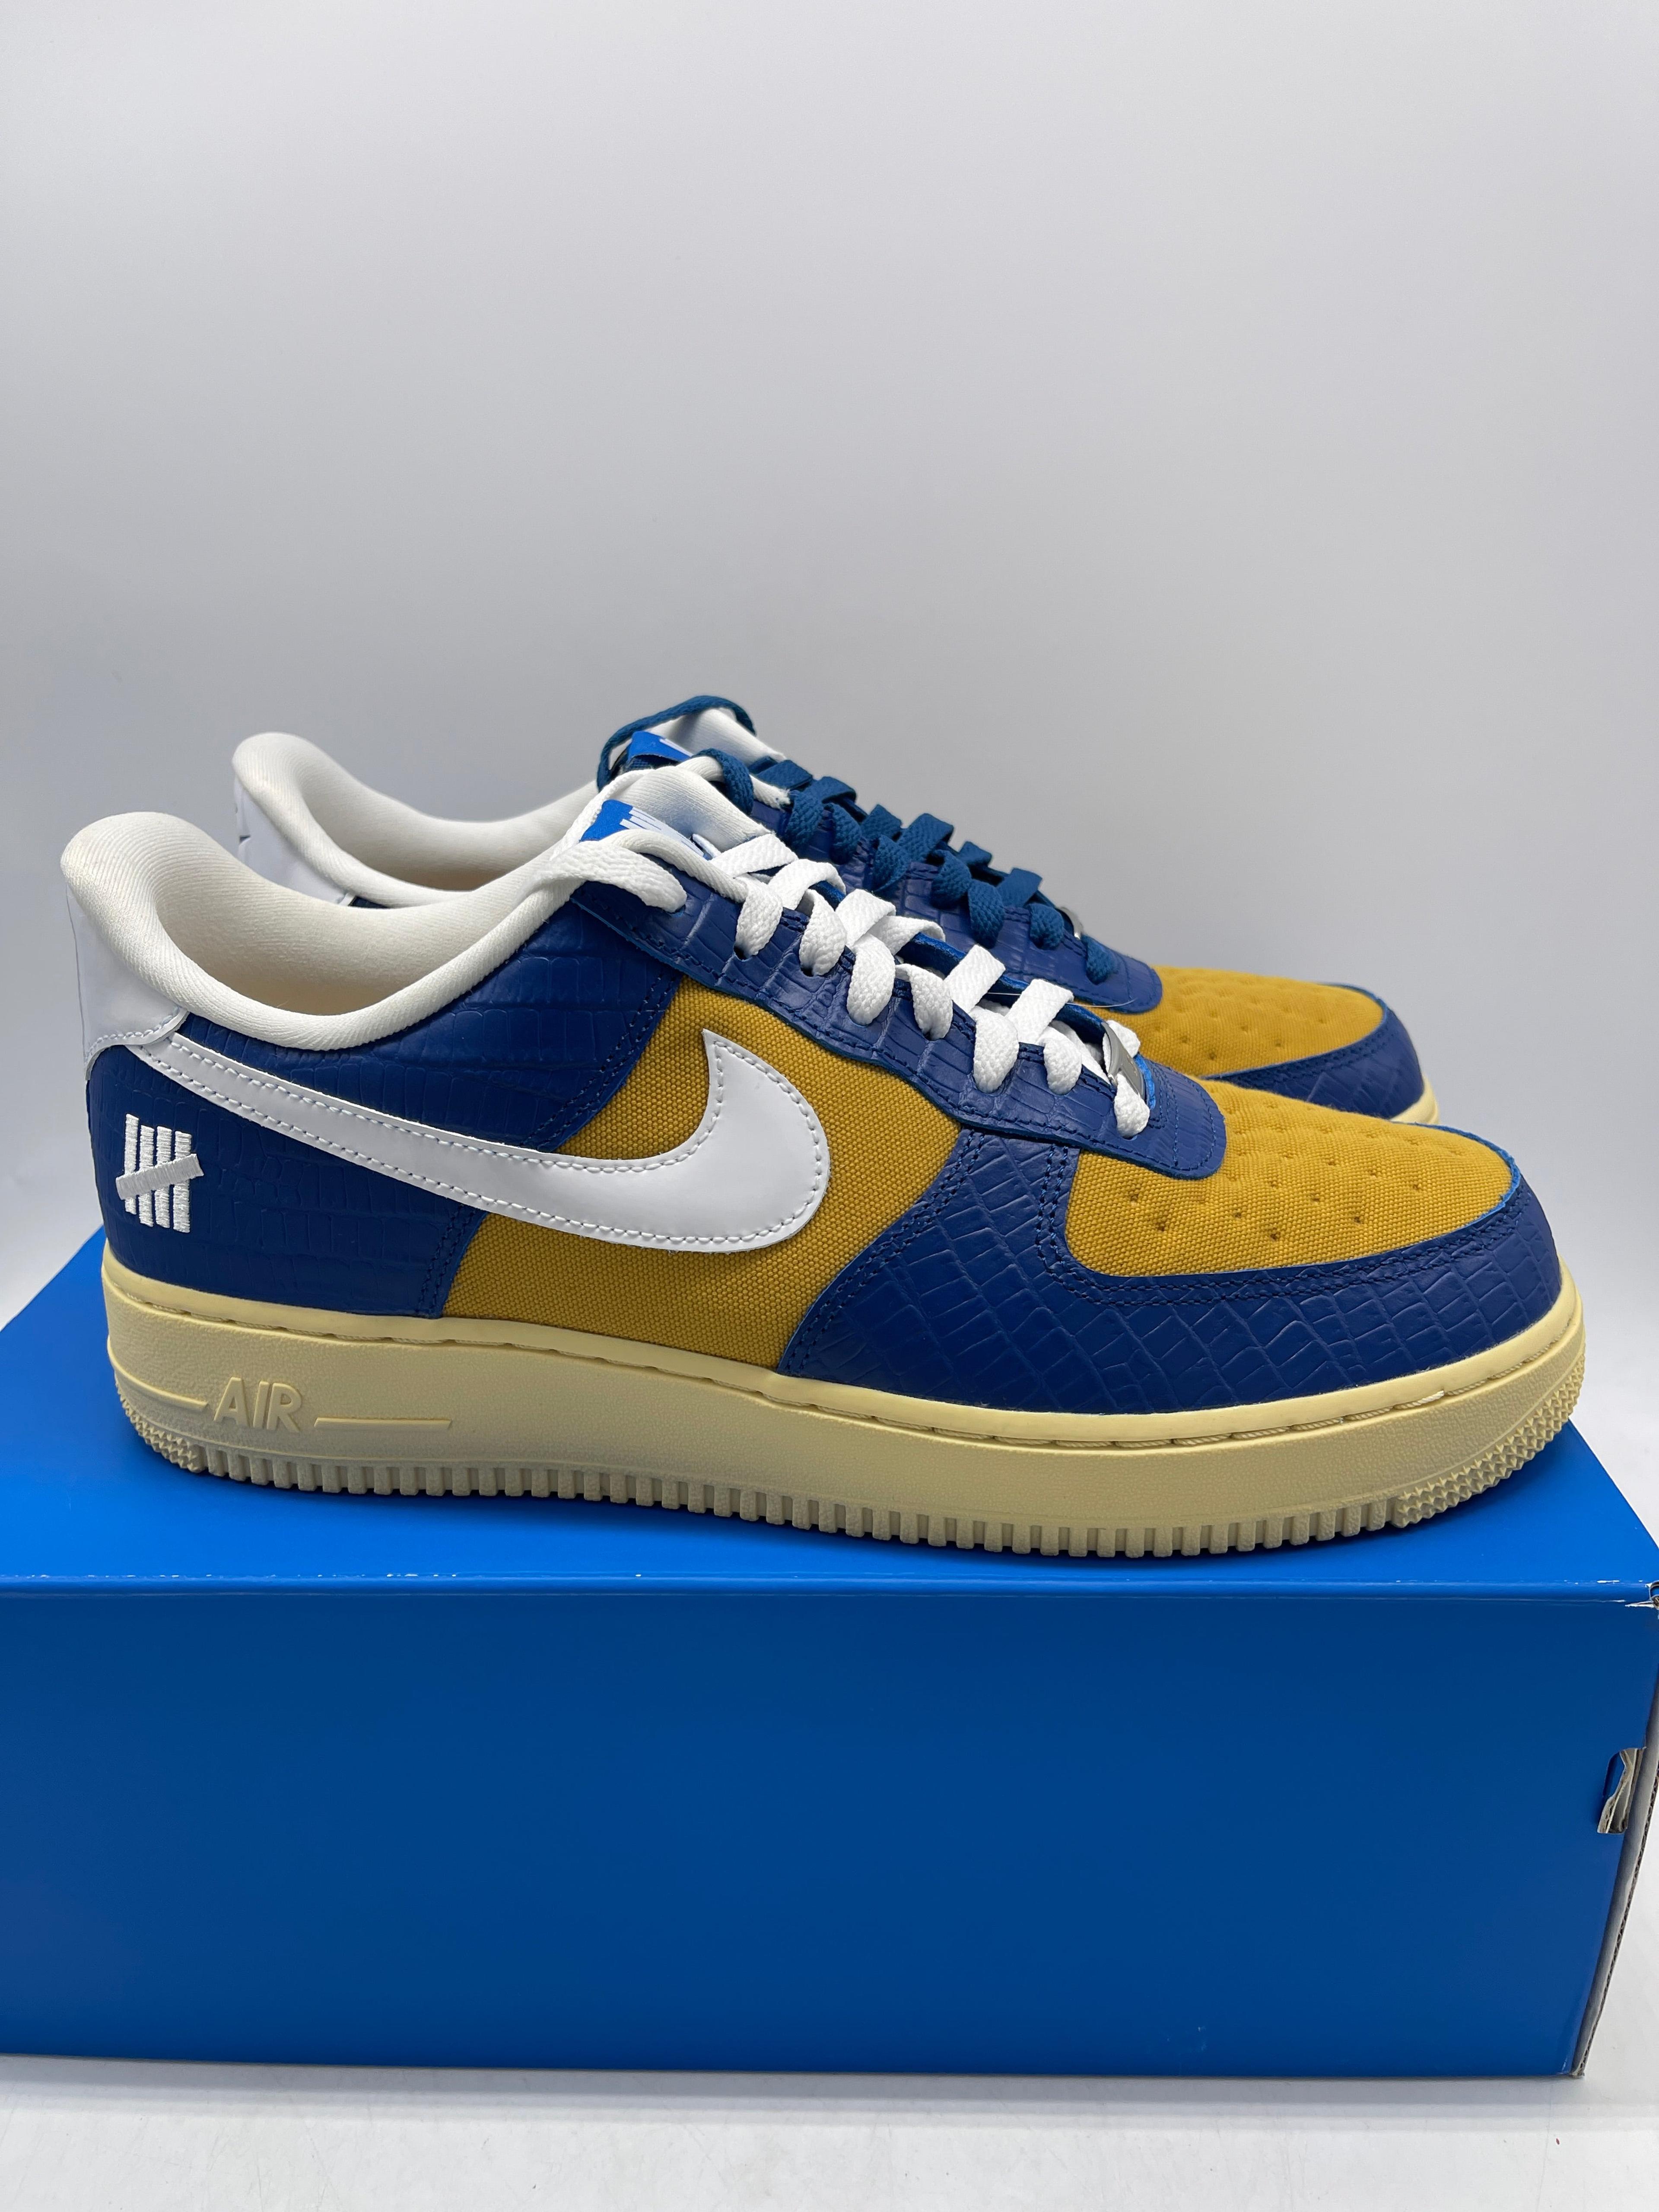 Nike Air Force 1 Low SP Undefeated 5 on It Blue Yellow Croc